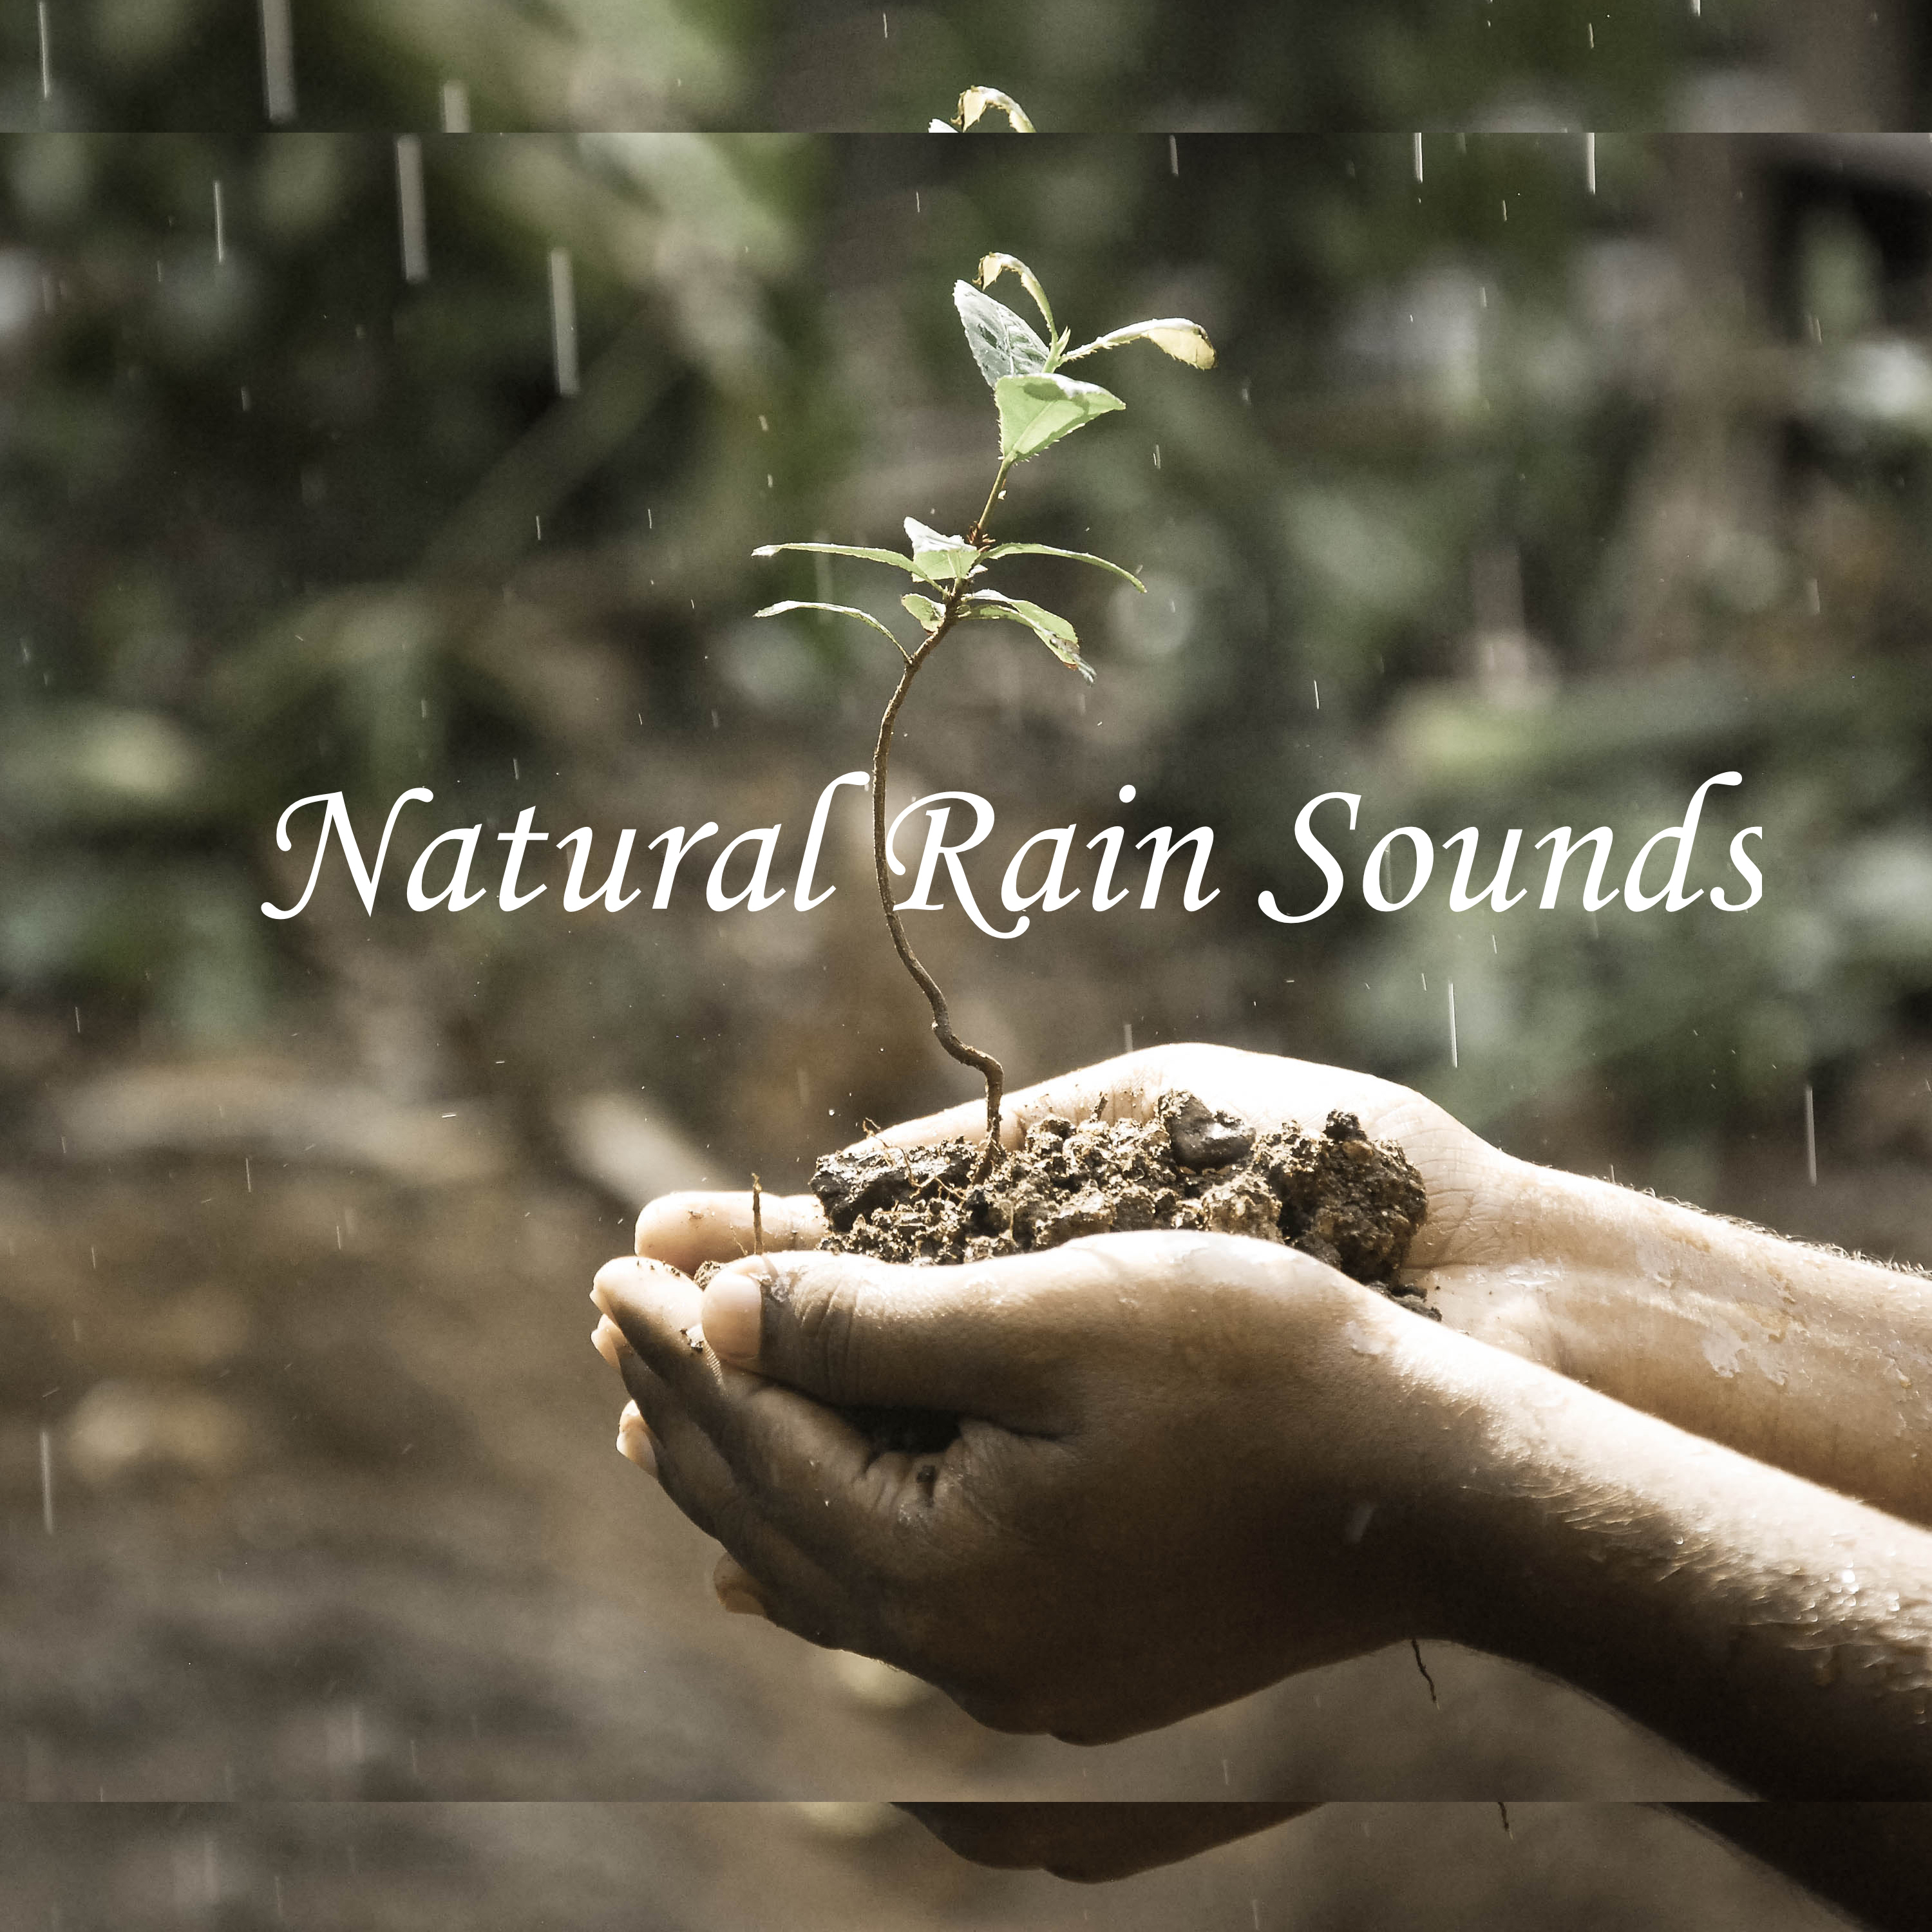 13 Natural Rain Sounds: Sleep Aid, Insomnia, Relaxation, Focus, Zen, Meditate, Calm, Tranquil, Peace